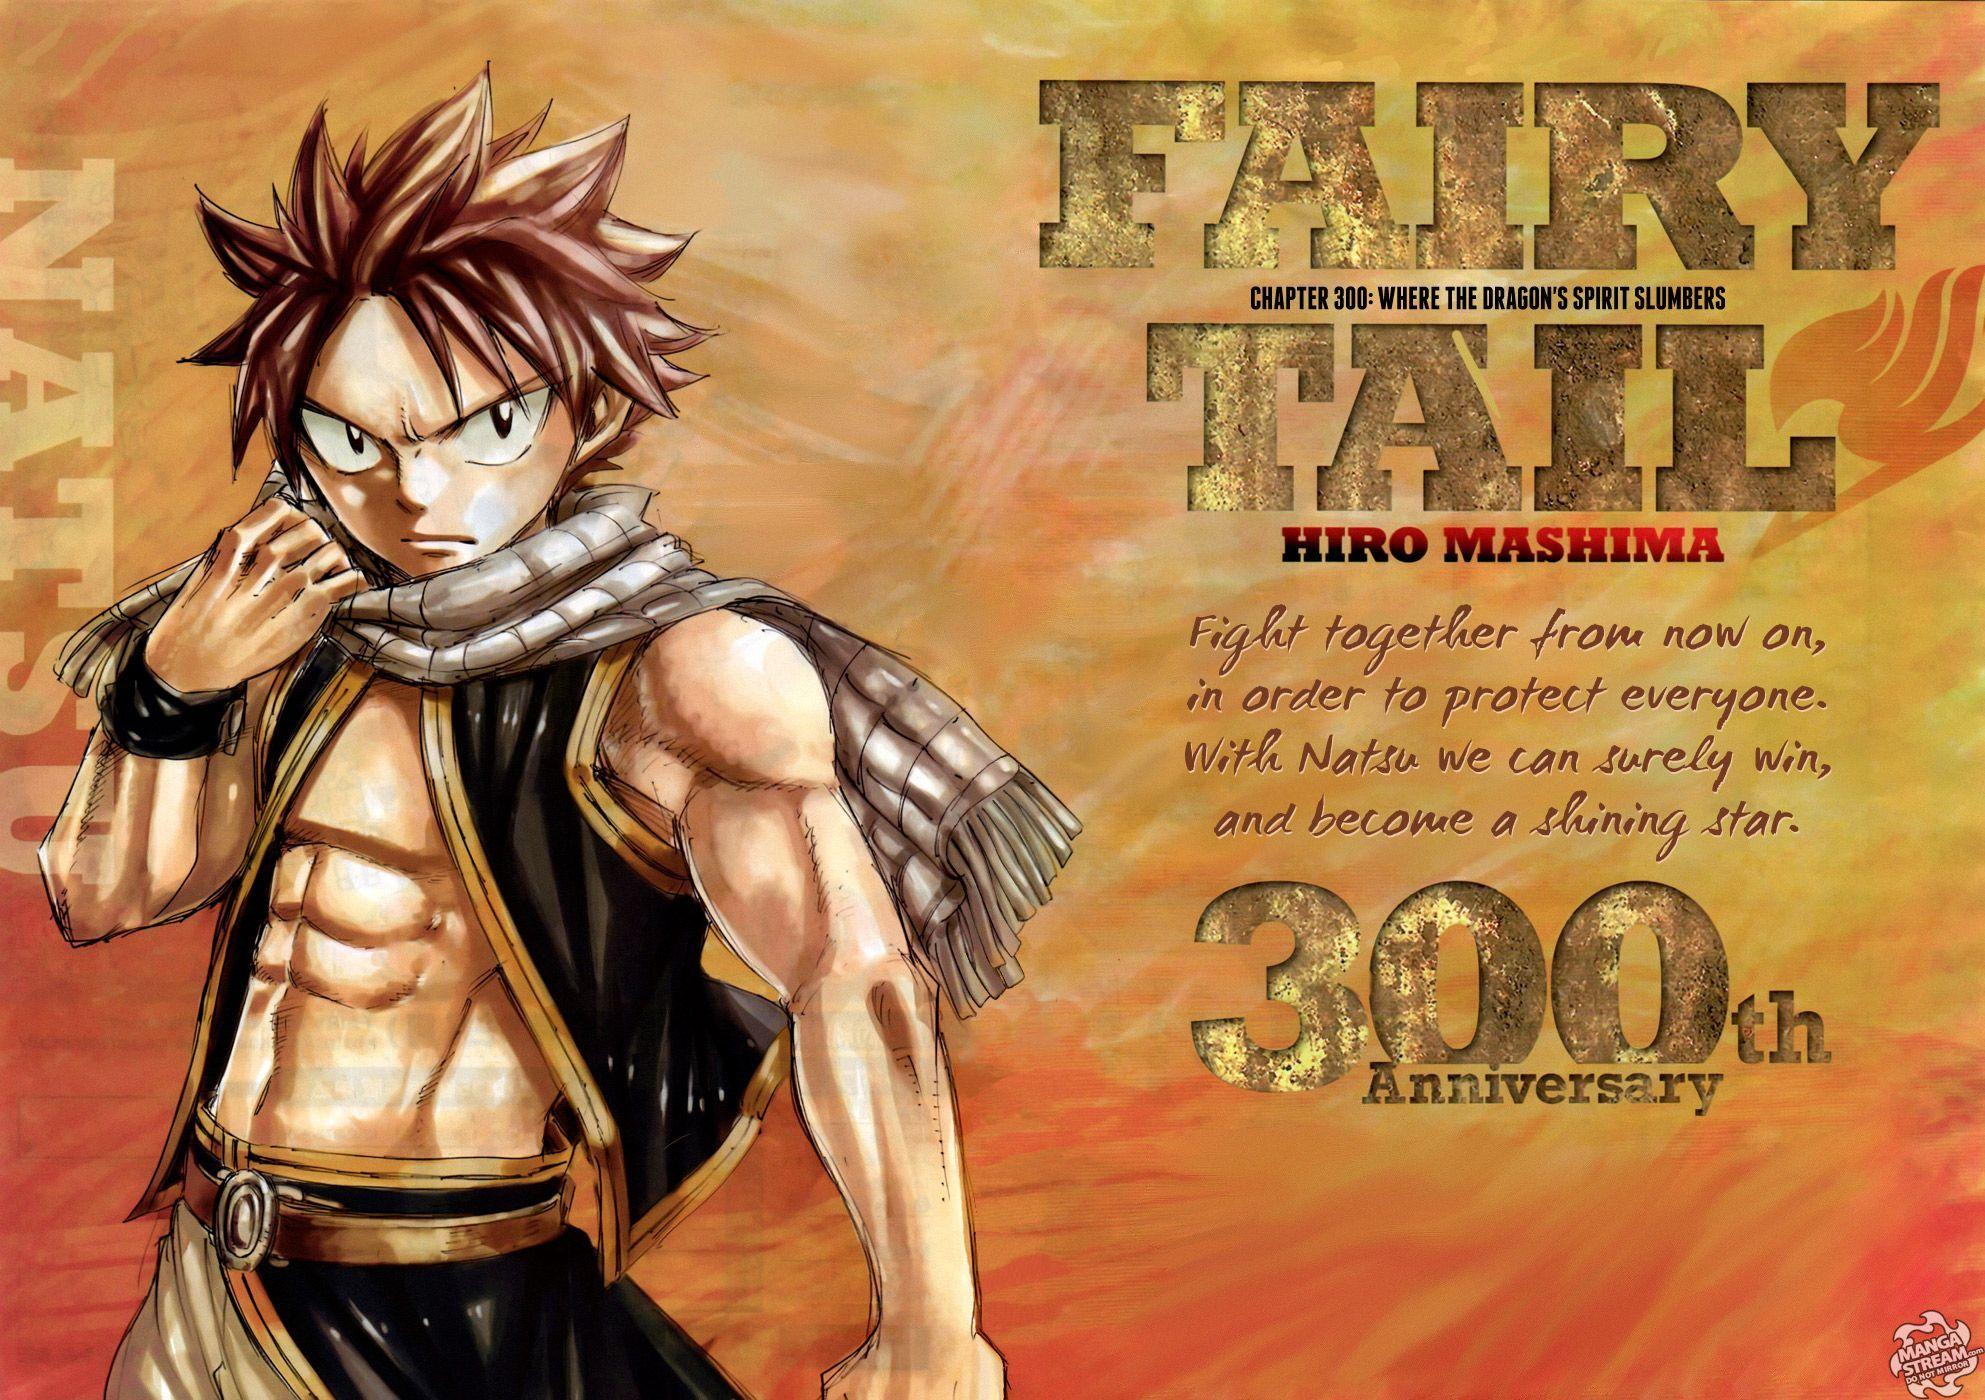 Fairy Tail Natsu Chapter 300 Exclusive HD Wallpaper #